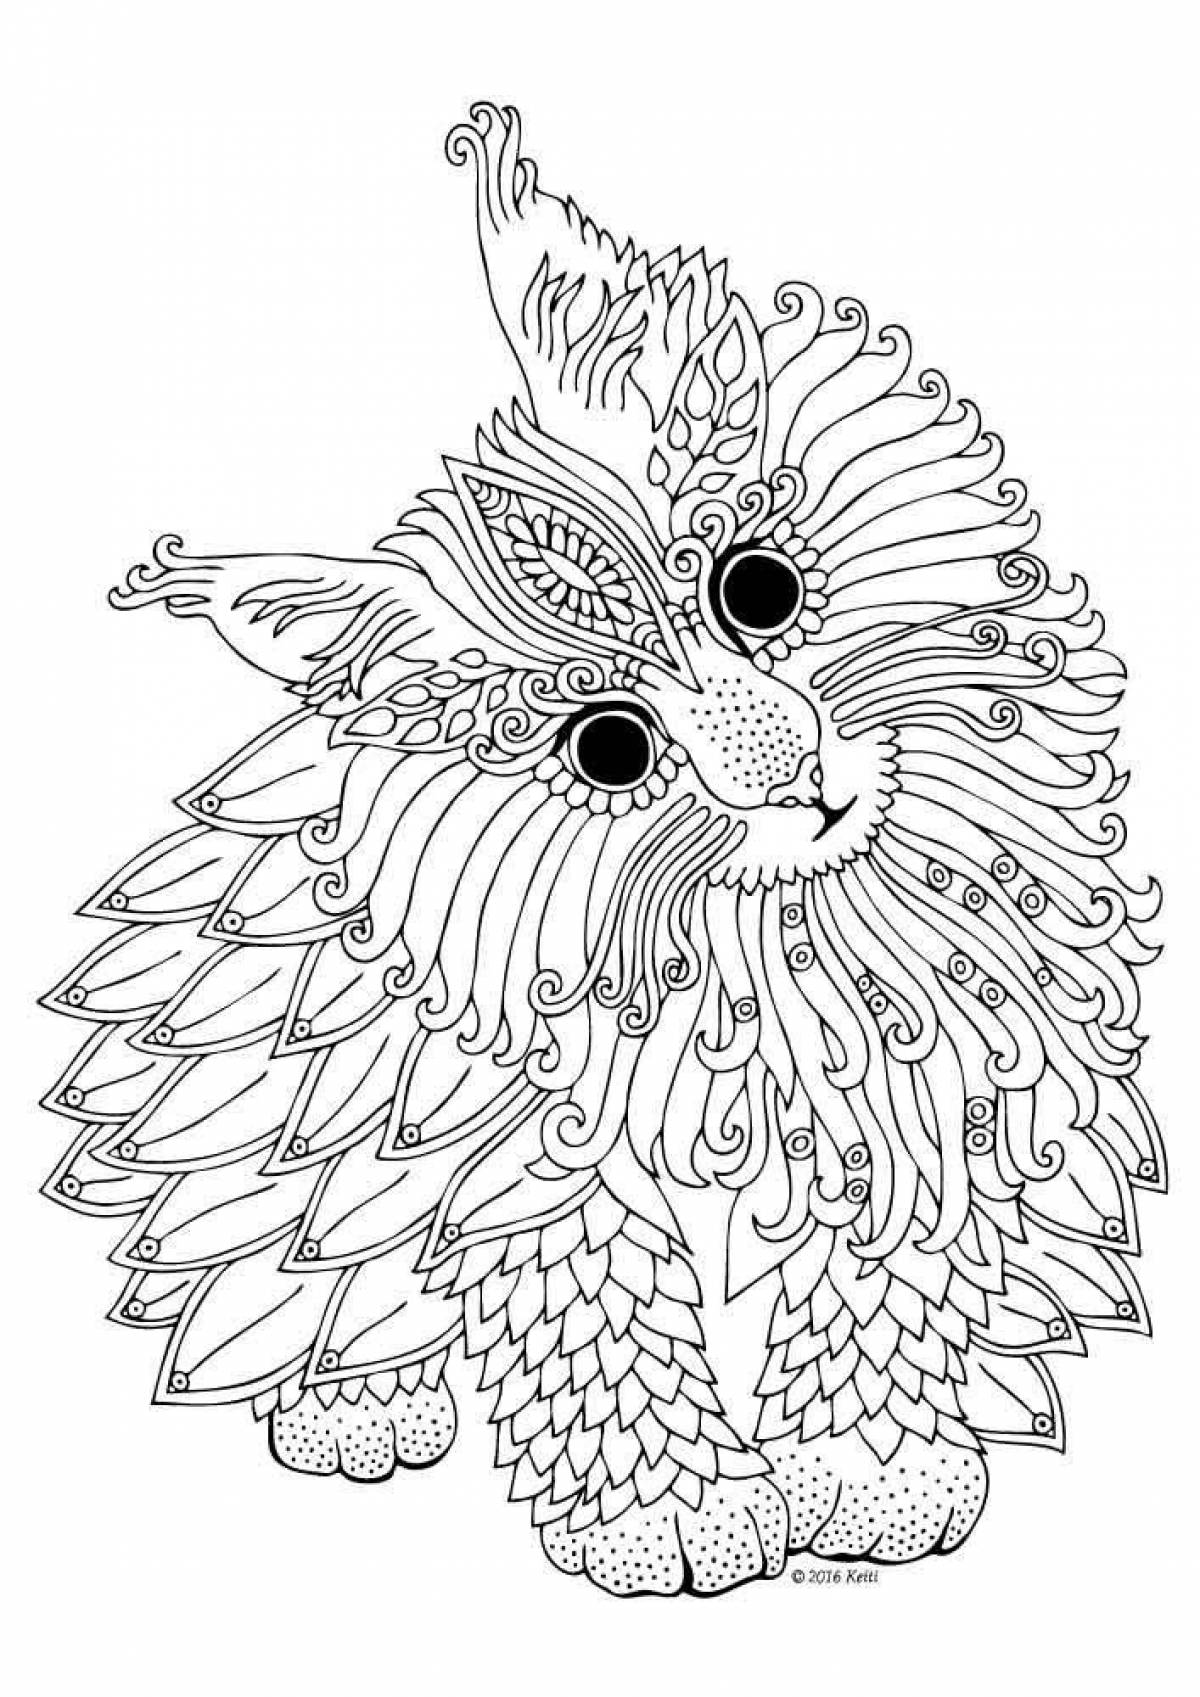 Sparkly complex animal coloring pages